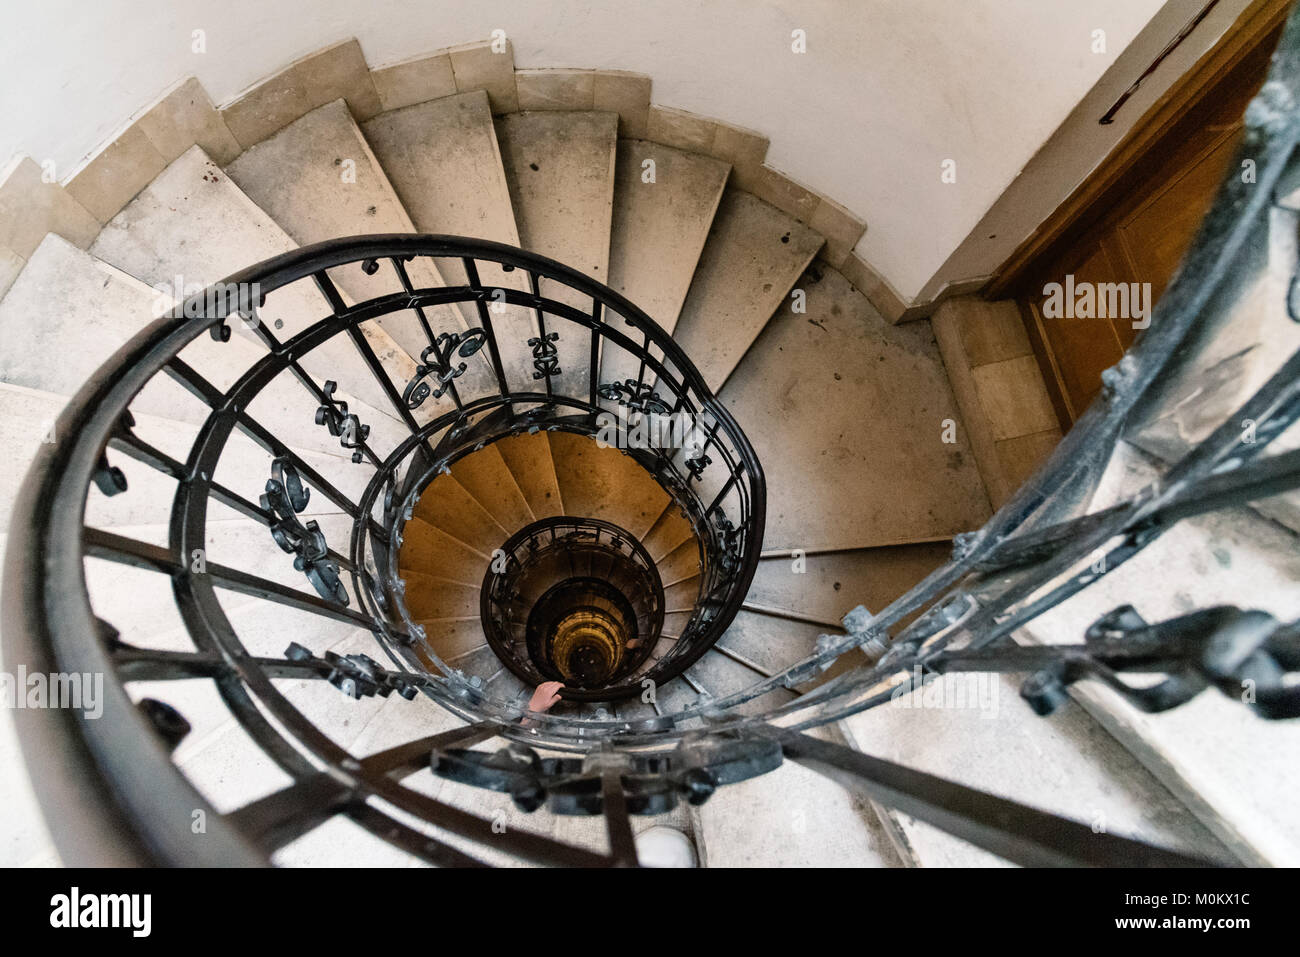 High angle view of spiral staircase with hand of man below. Stock Photo